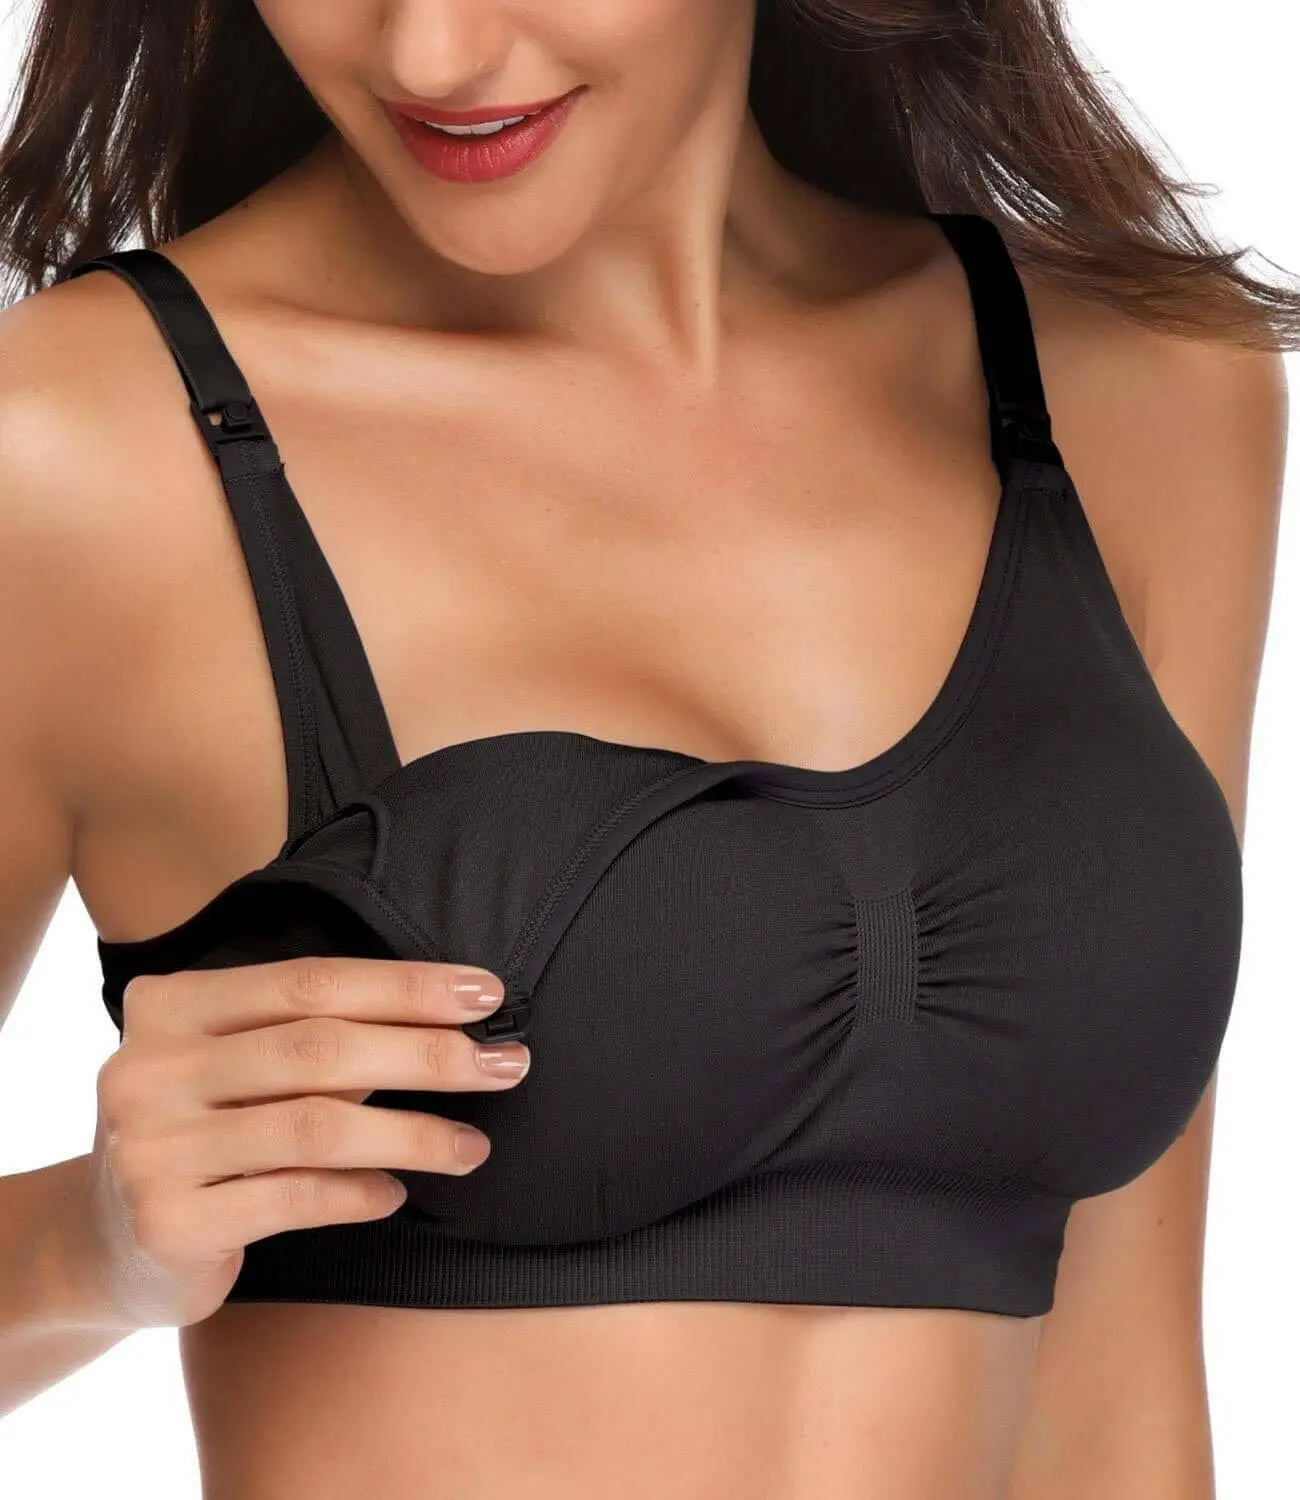 Lataly women Seamless Bras (pack of 5)